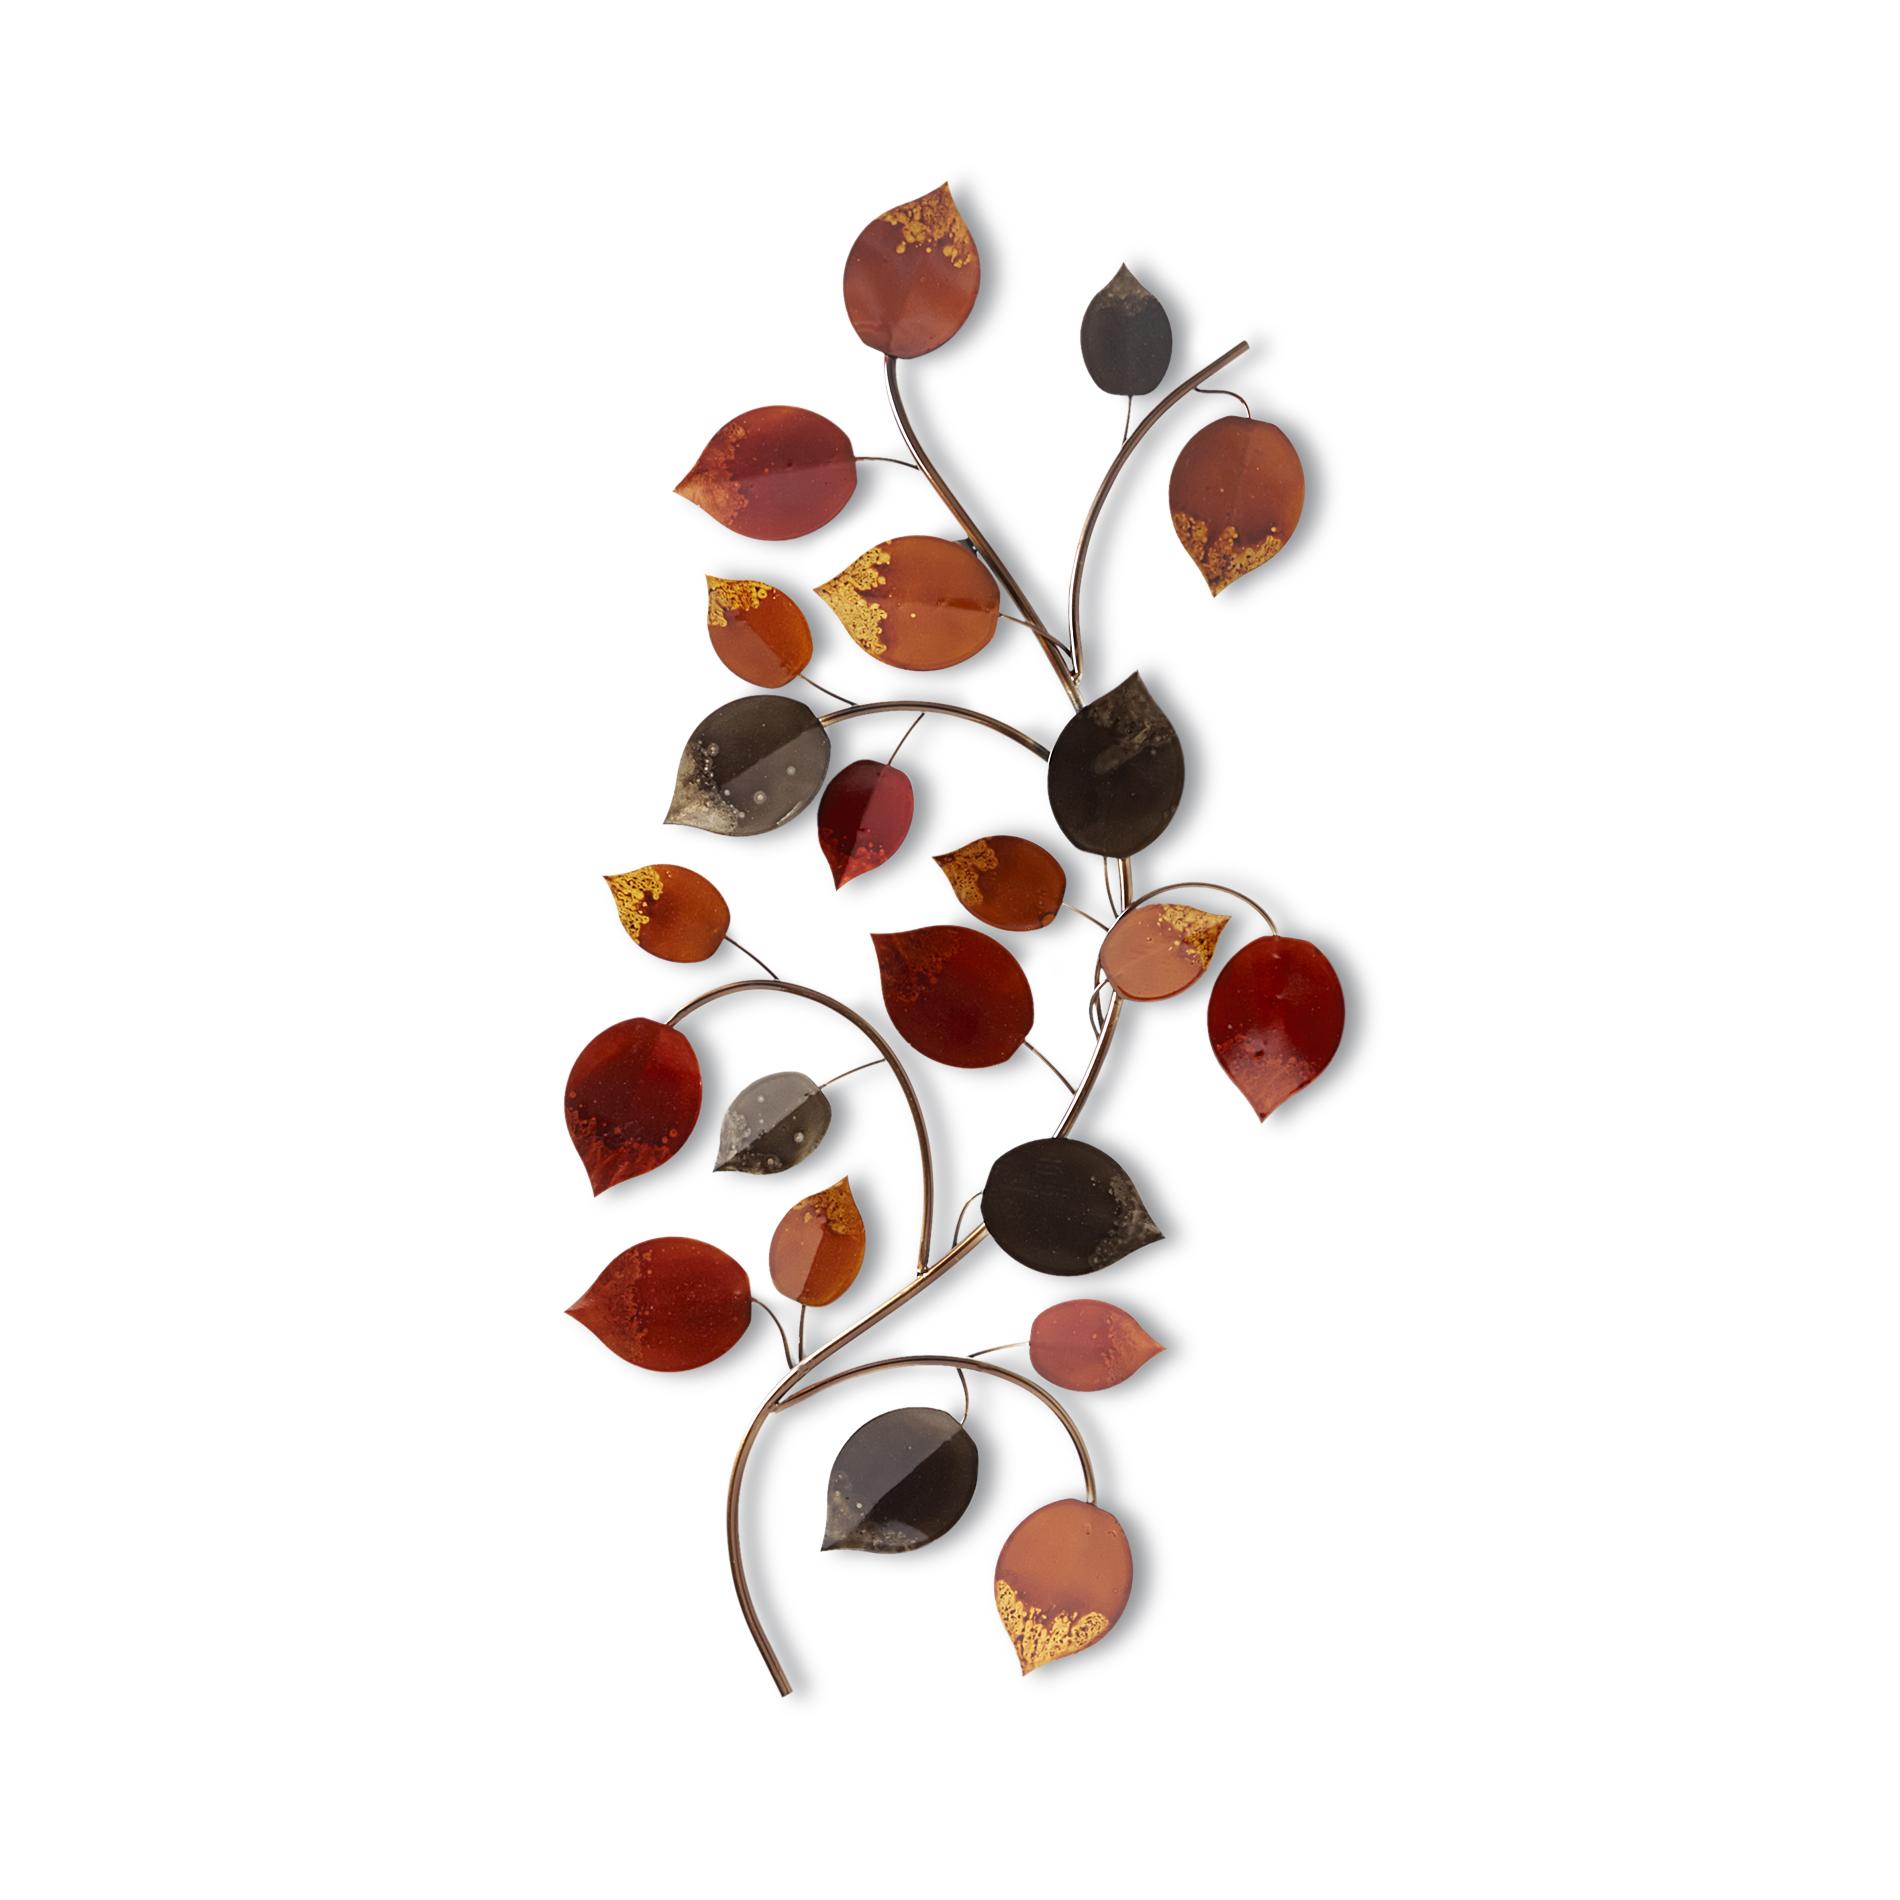 Elements Dimensional Metal Wall Sculpture - Branch & Leaves